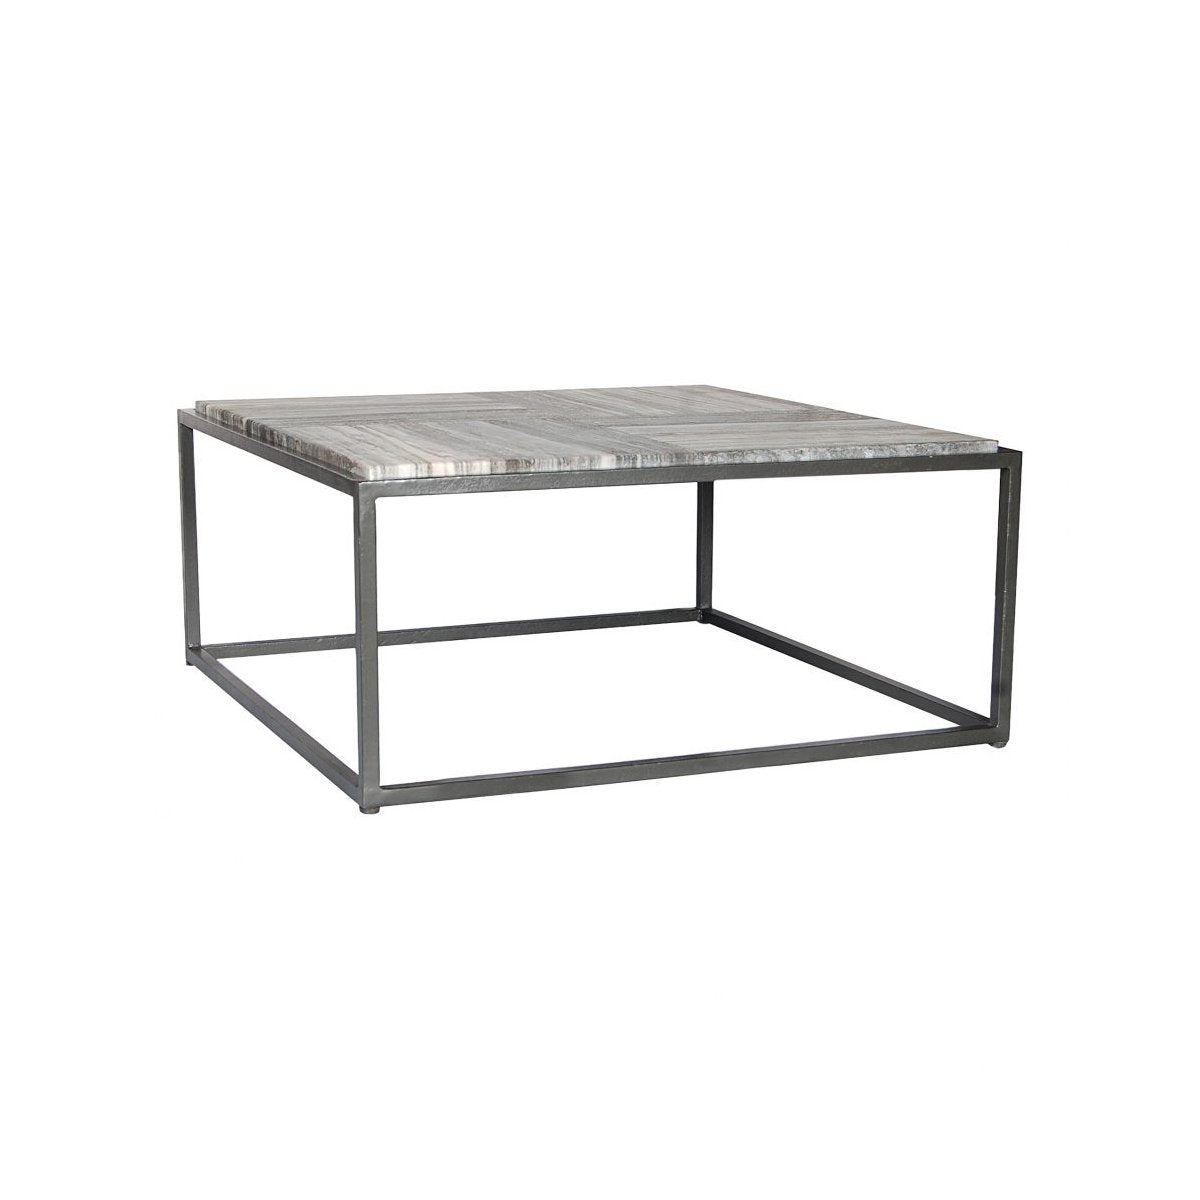 Load image into Gallery viewer, Winslow Marble Coffee Table Coffee Tables Moe&amp;#39;s     Four Hands, Burke Decor, Mid Century Modern Furniture, Old Bones Furniture Company, Old Bones Co, Modern Mid Century, Designer Furniture, https://www.oldbonesco.com/
